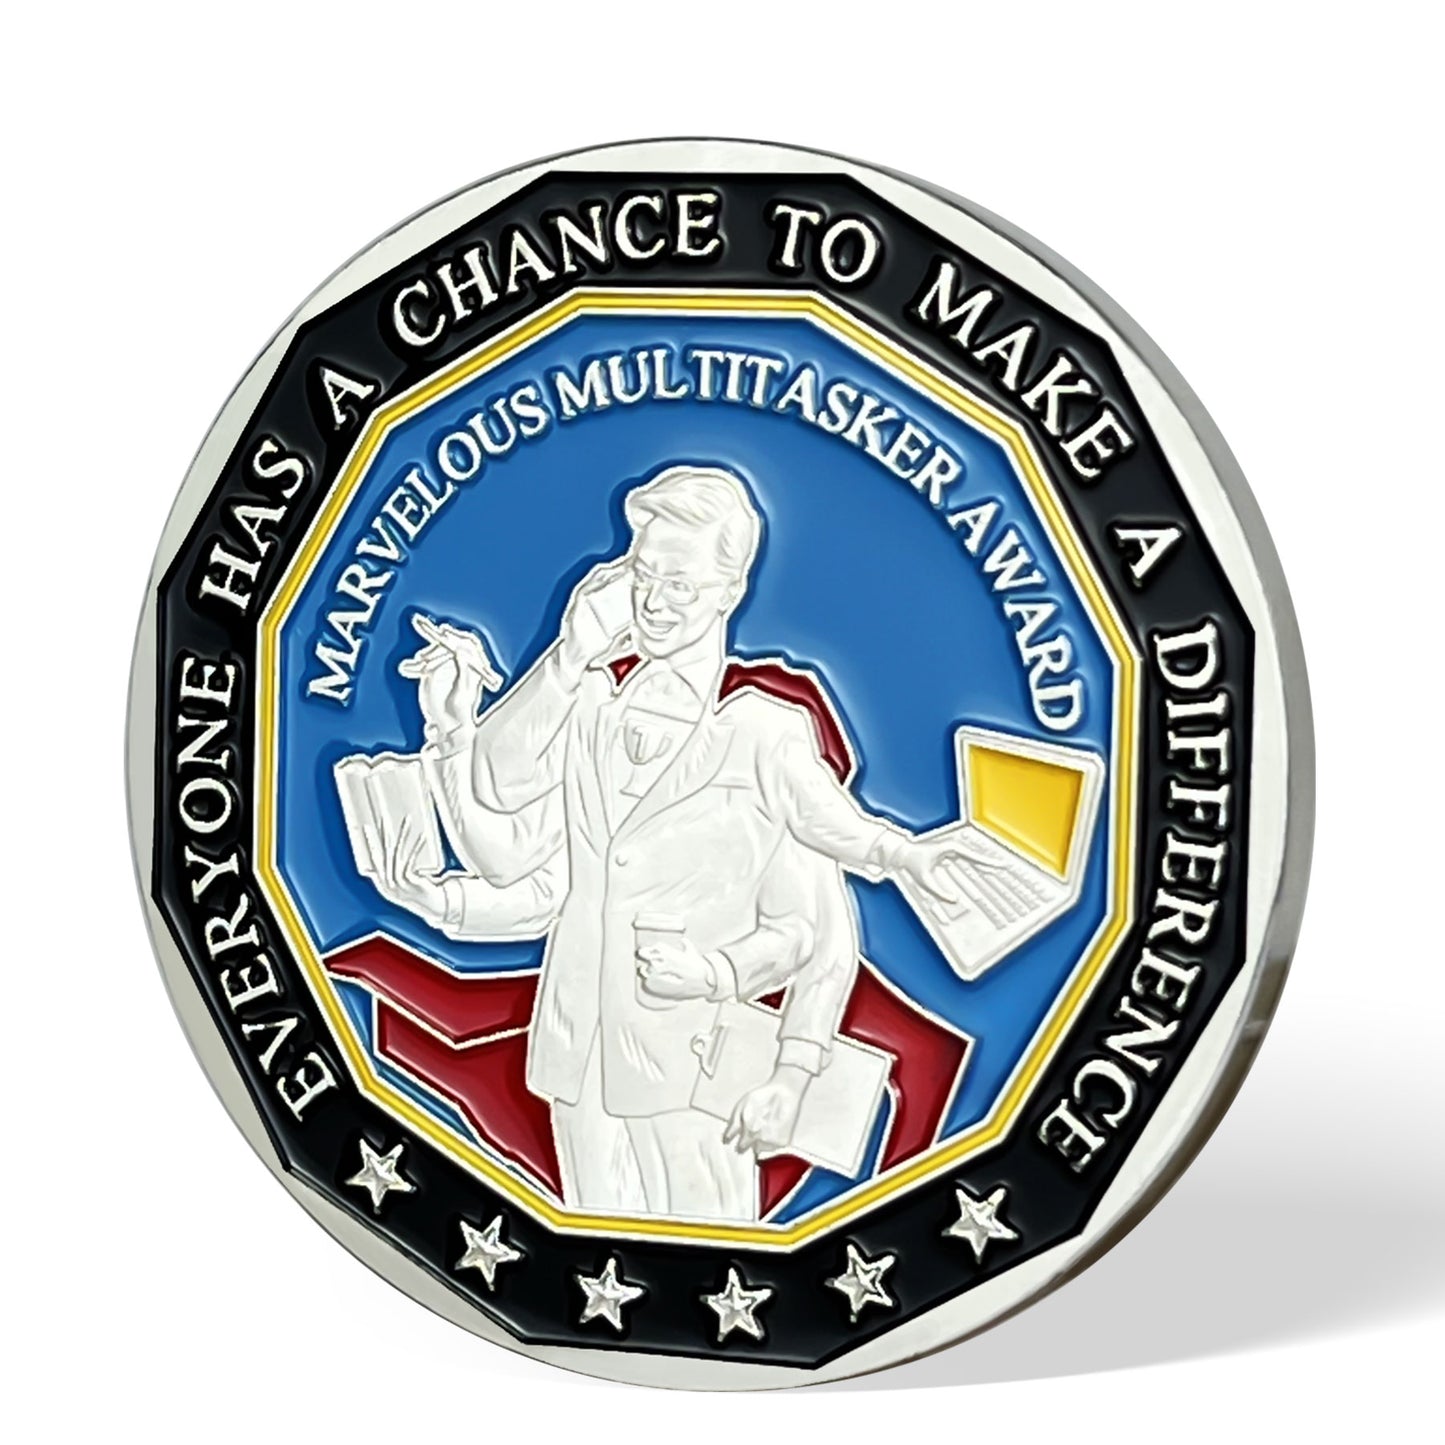 Encouragement Challenge Coin-Employee Appreciation Gifts Inspirational Thank You Coin for Students and Cowokers-Work Efficiency